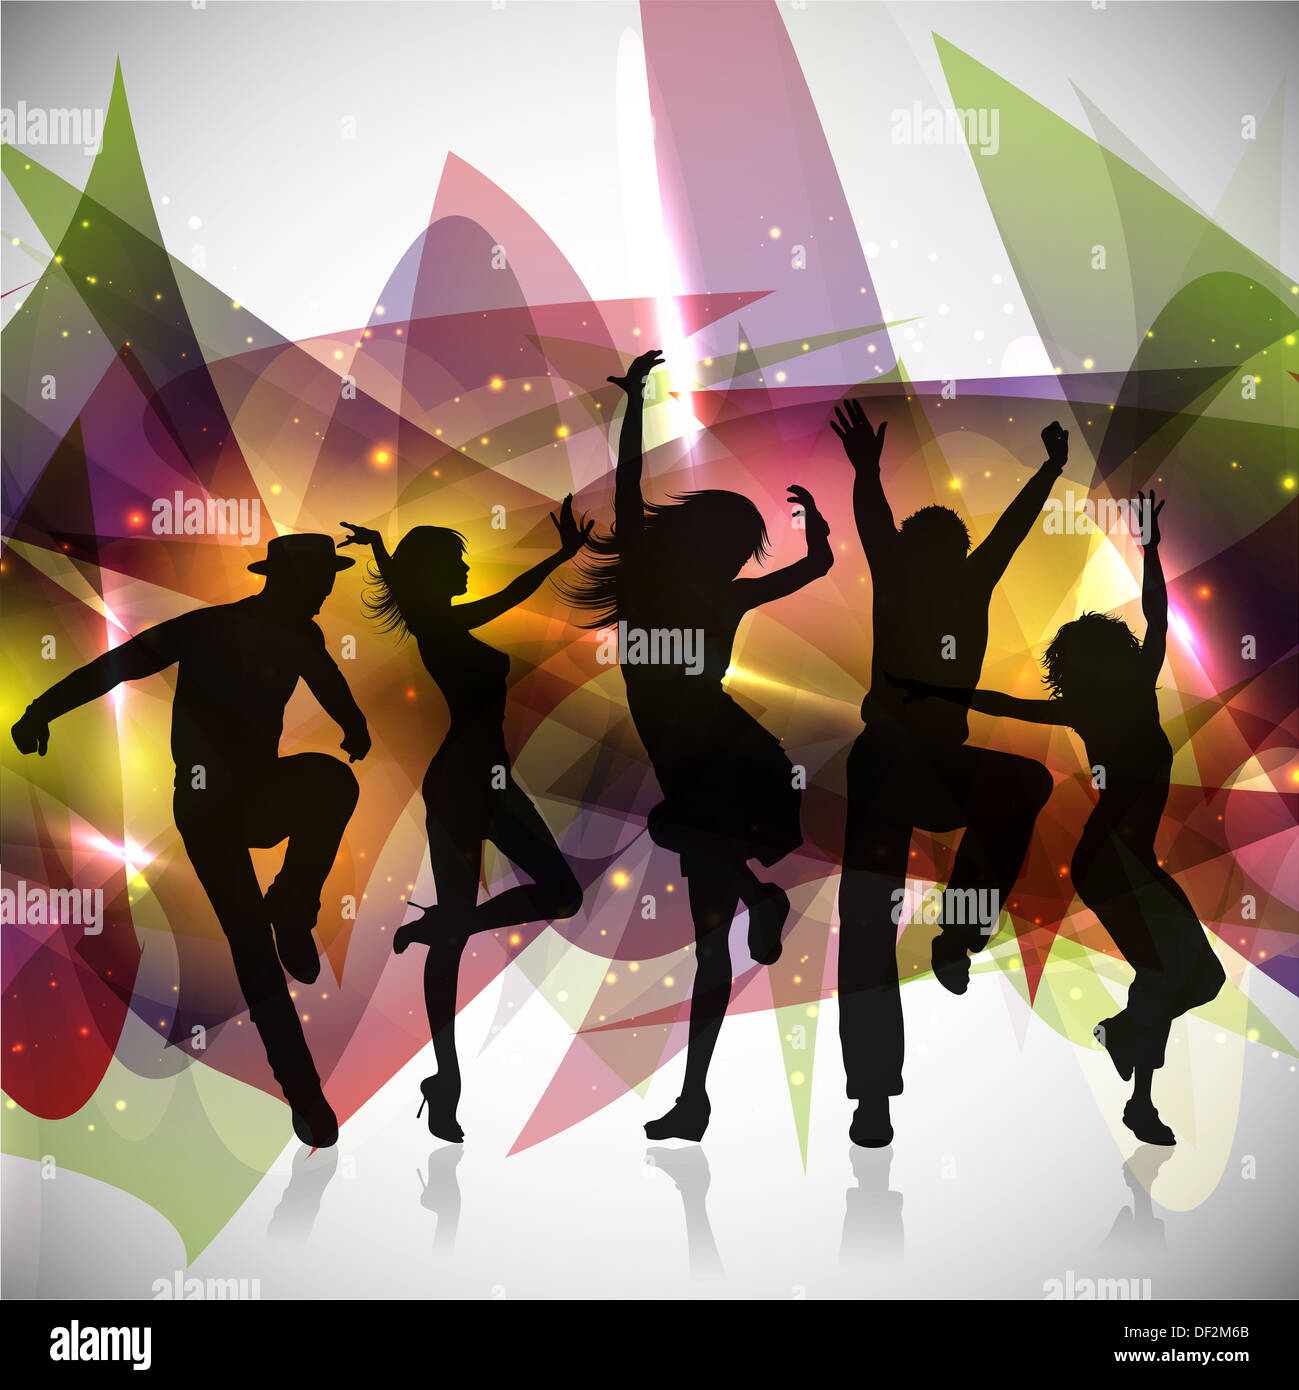 Silhouettes of people dancing on an abstract background Stock Photo - Alamy